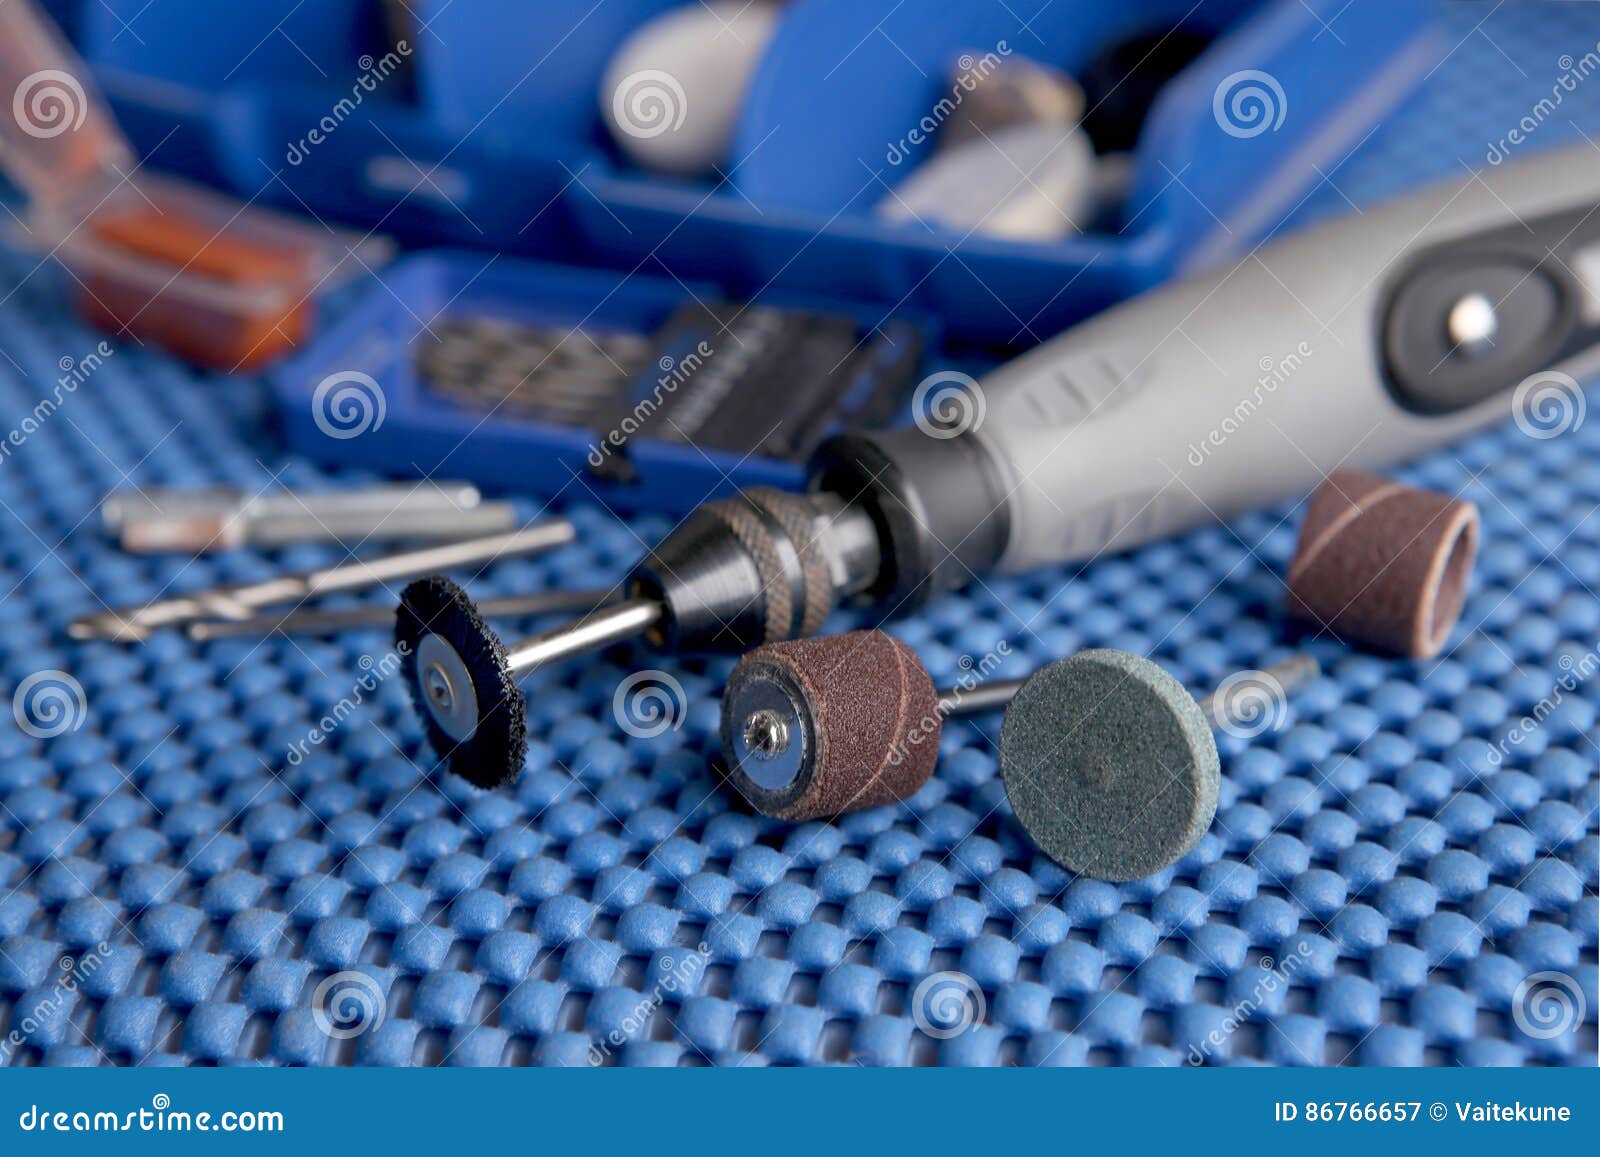 Small Drill for Craft Work. Stock Image - Image of craft, machine: 86766657